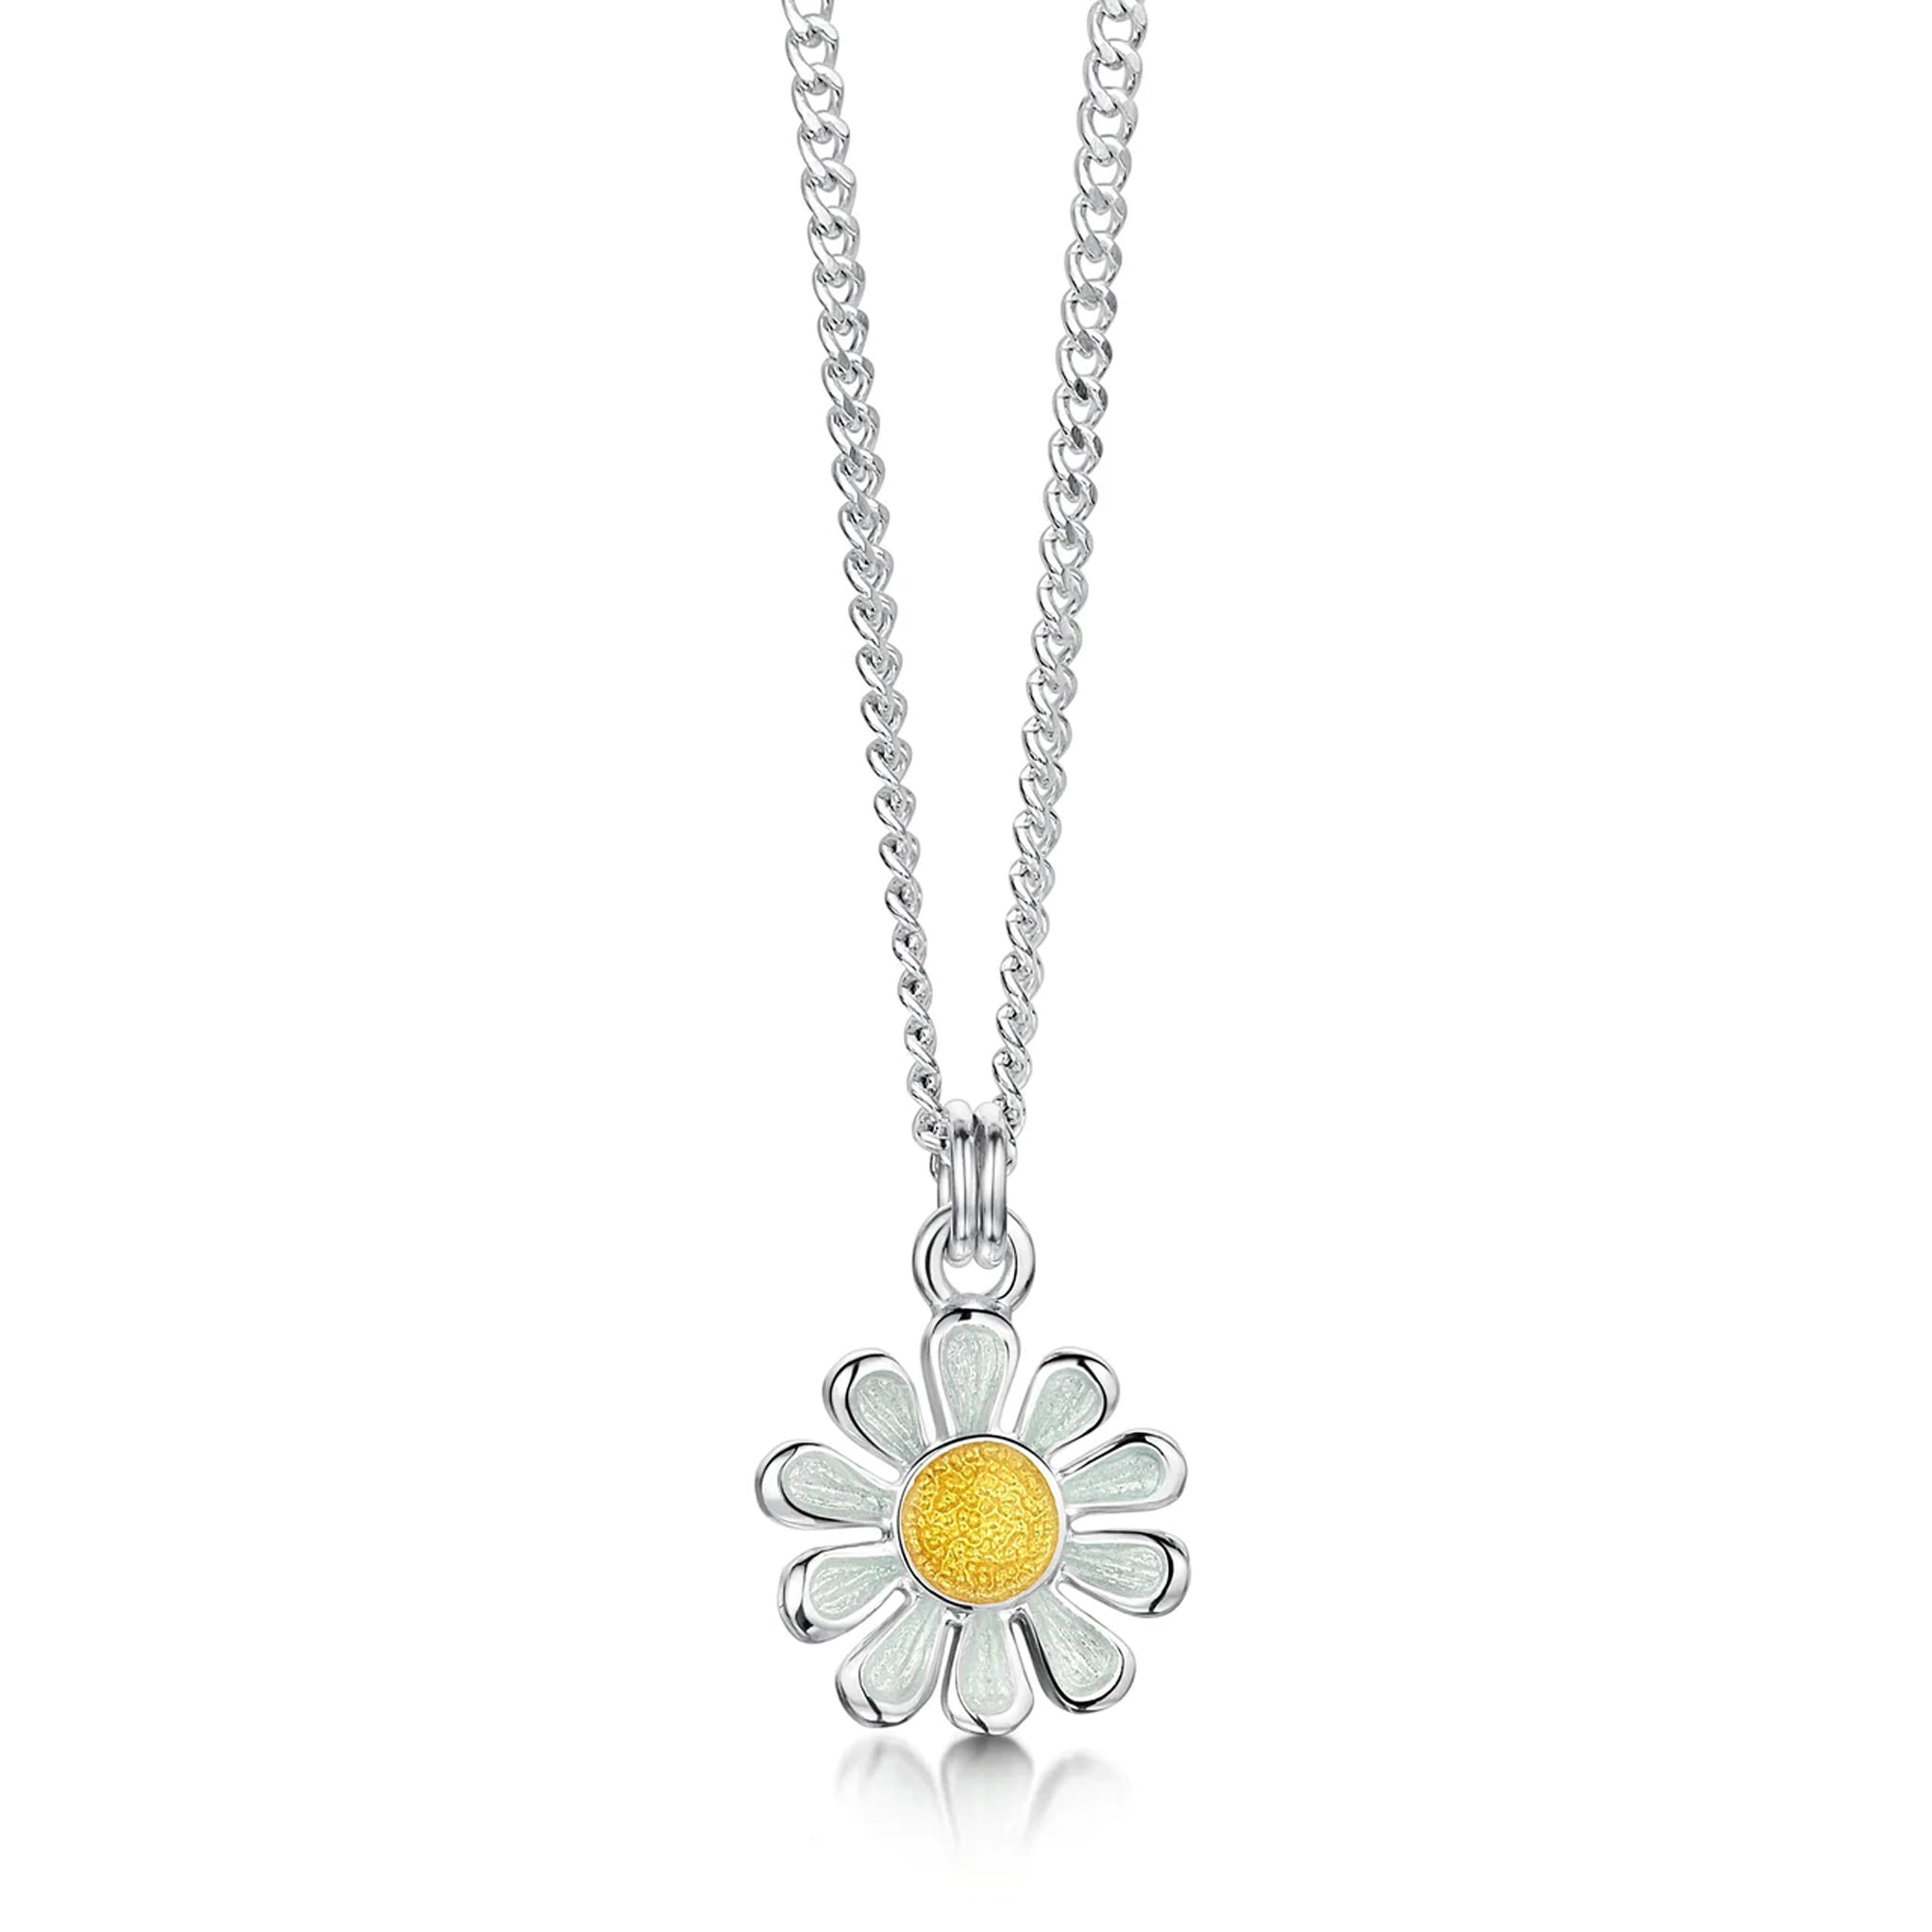 Polished silver small daisy pendant in yellow and white enamel